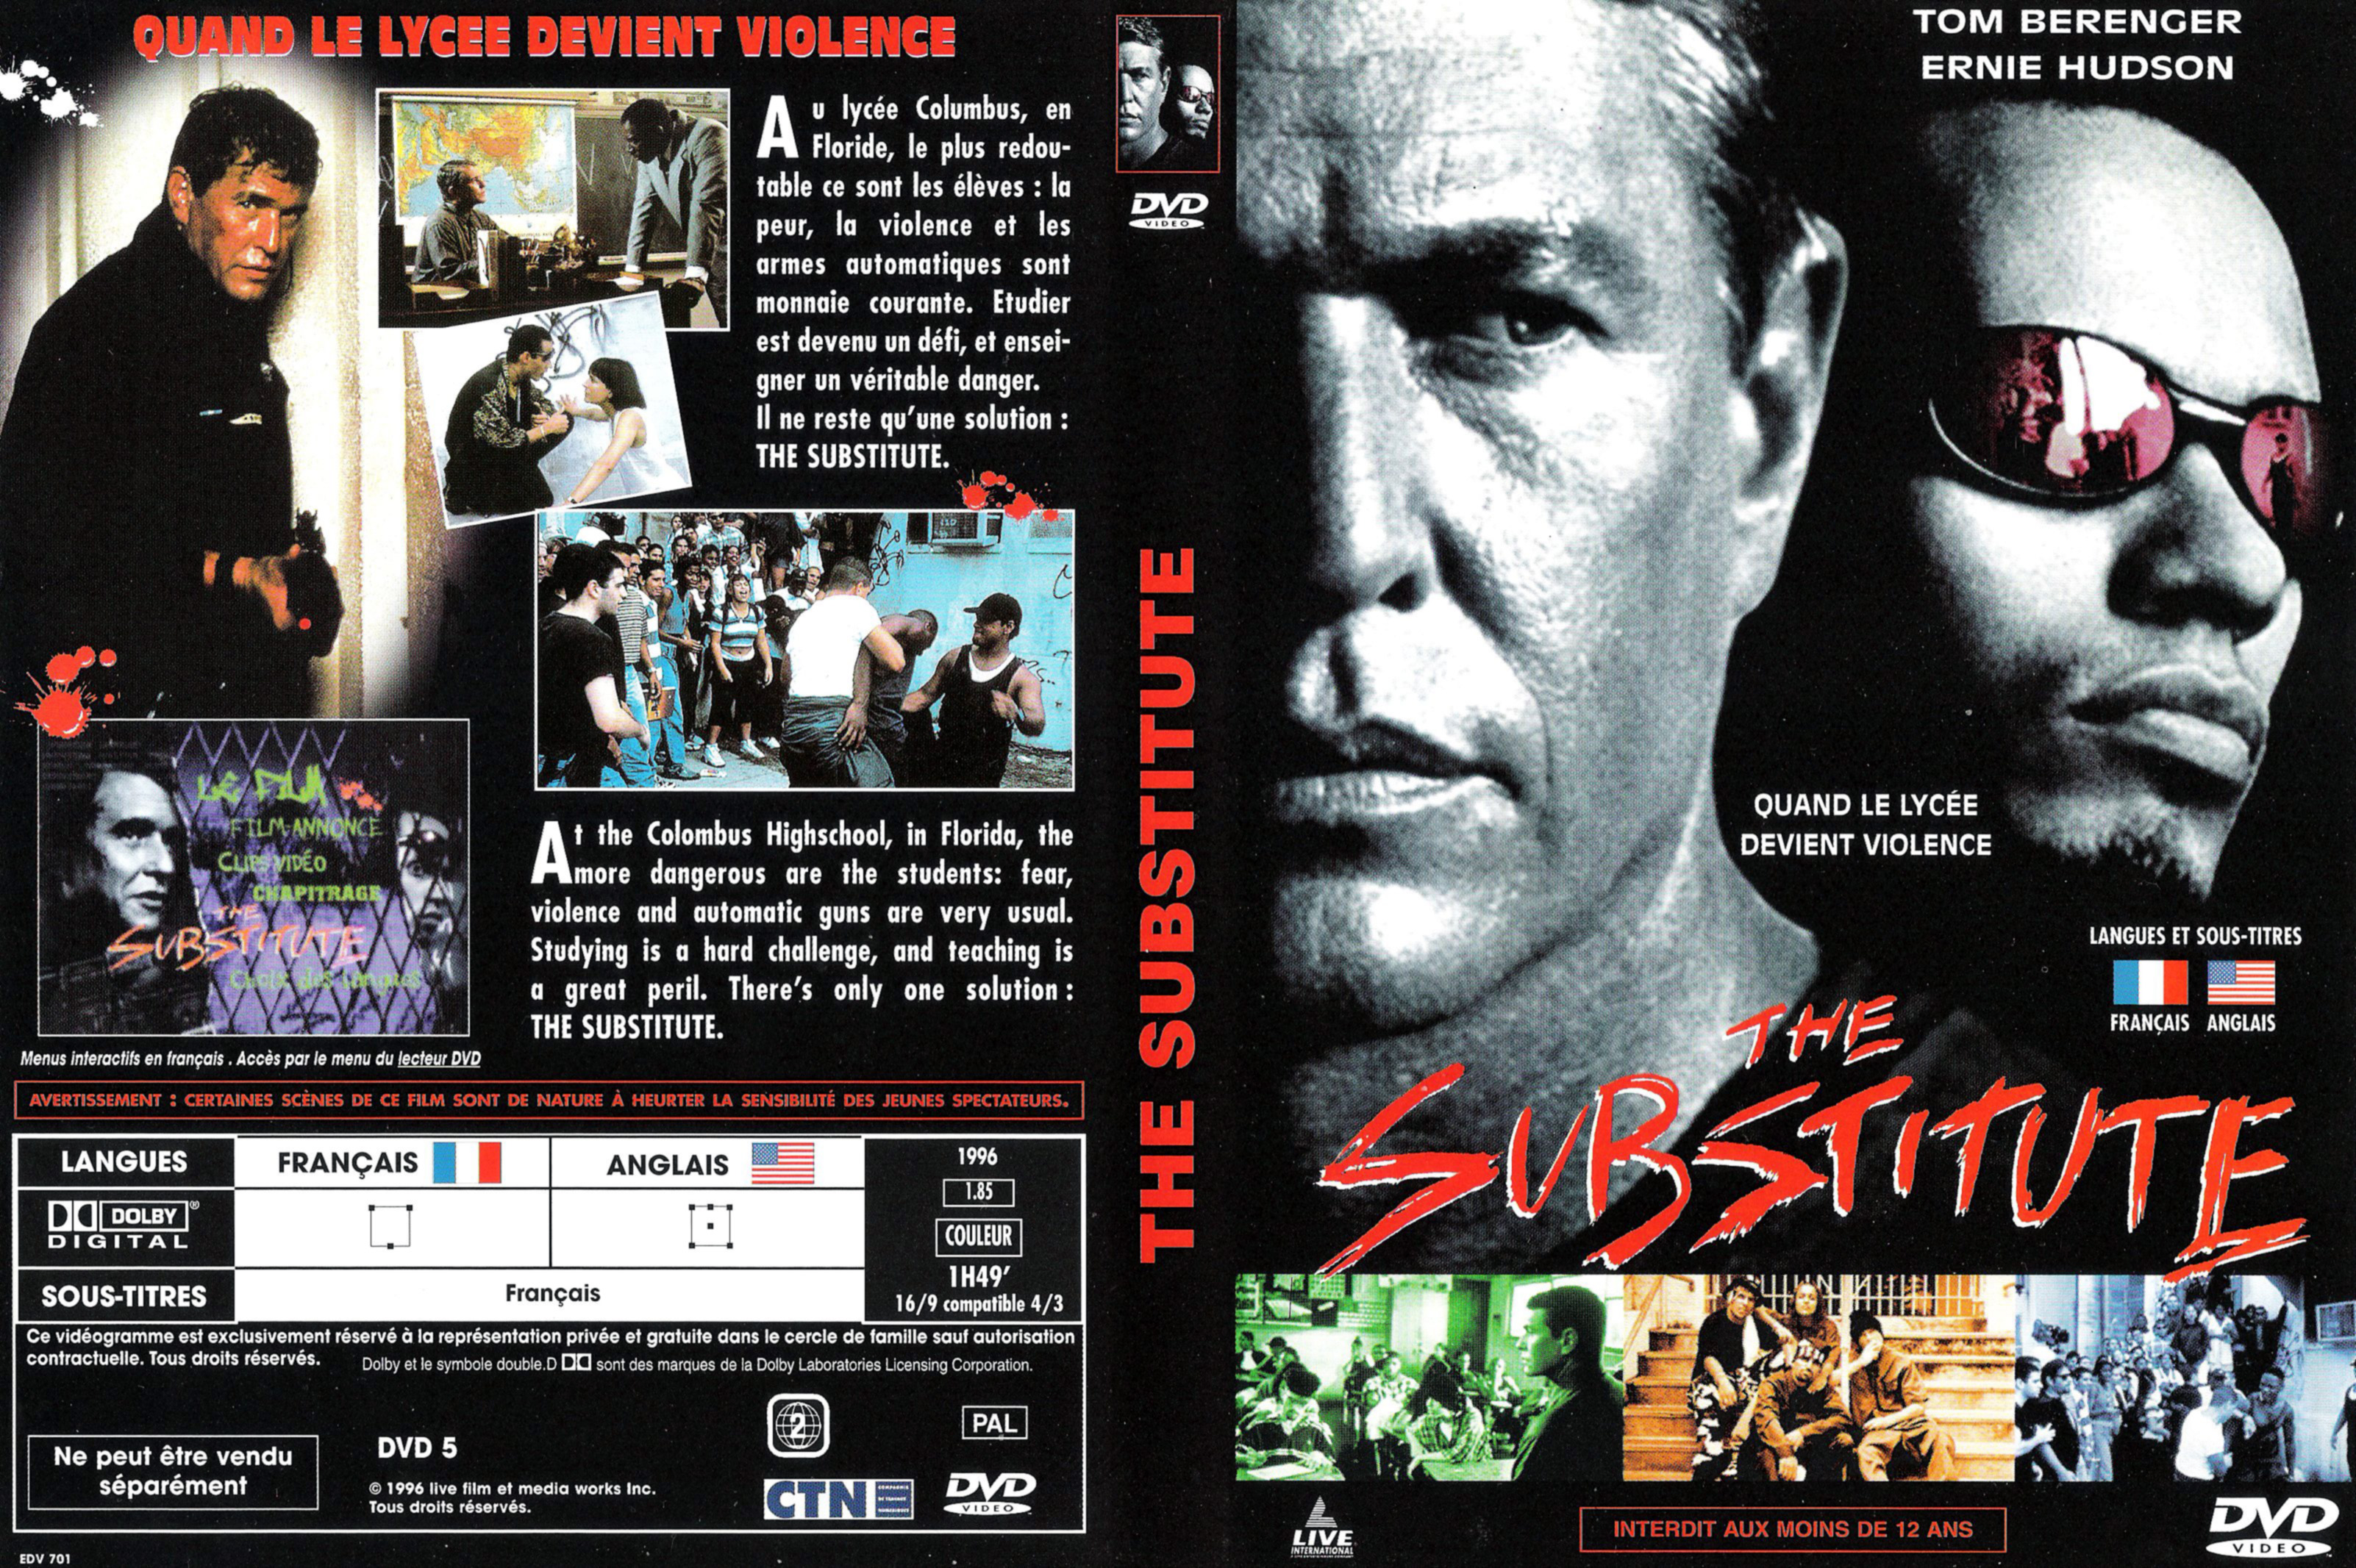 Jaquette DVD The substitute v2